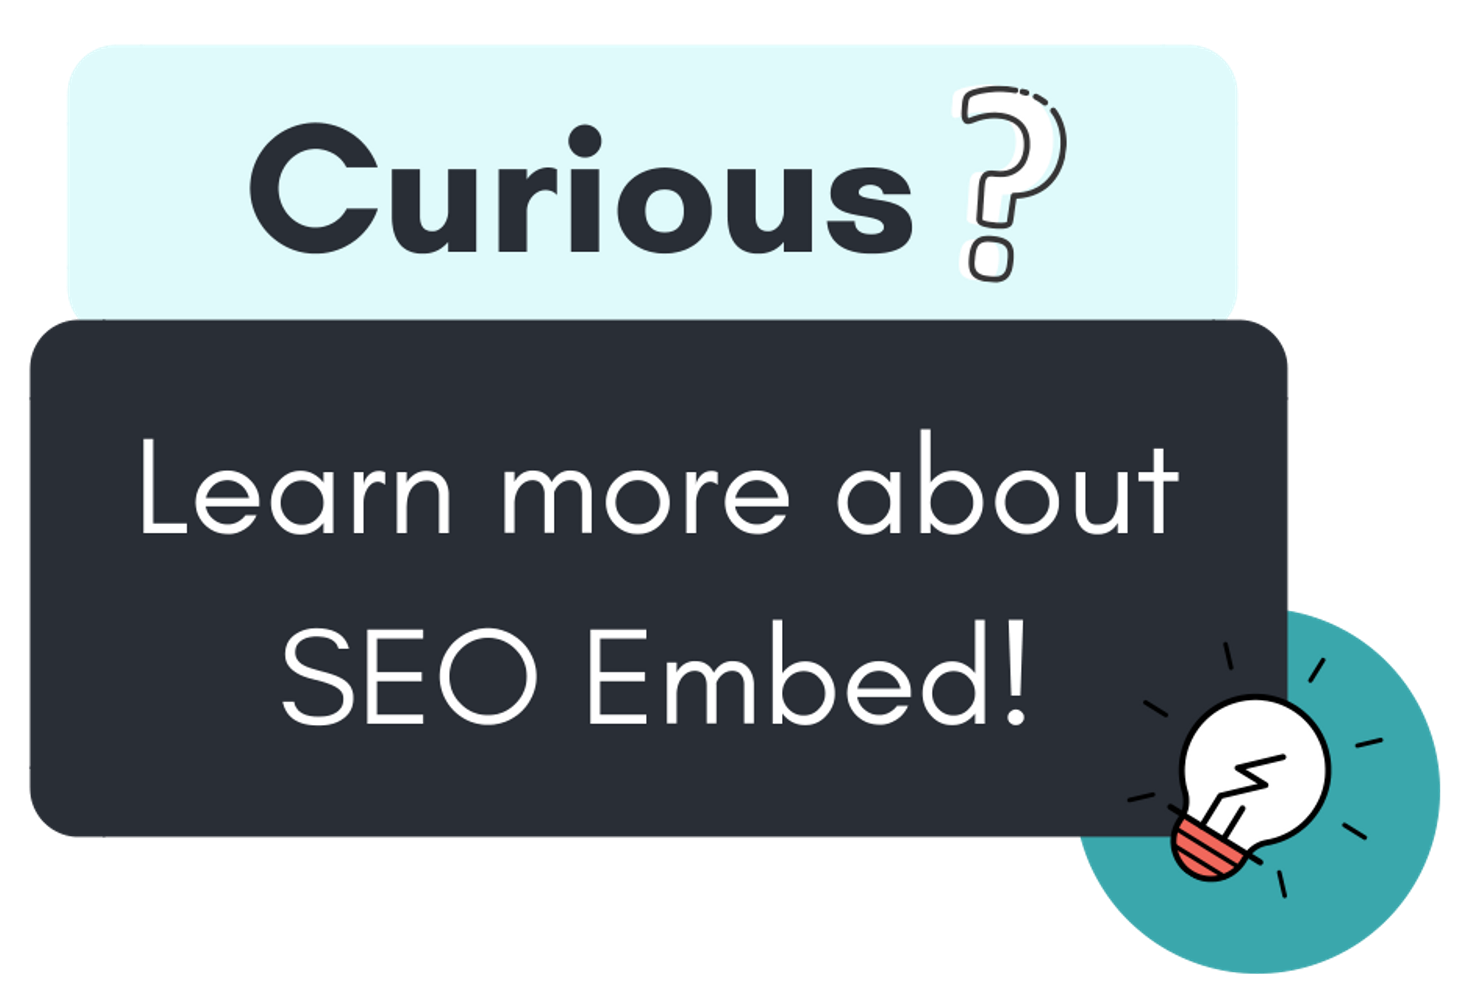 Learn more about SEO Embed